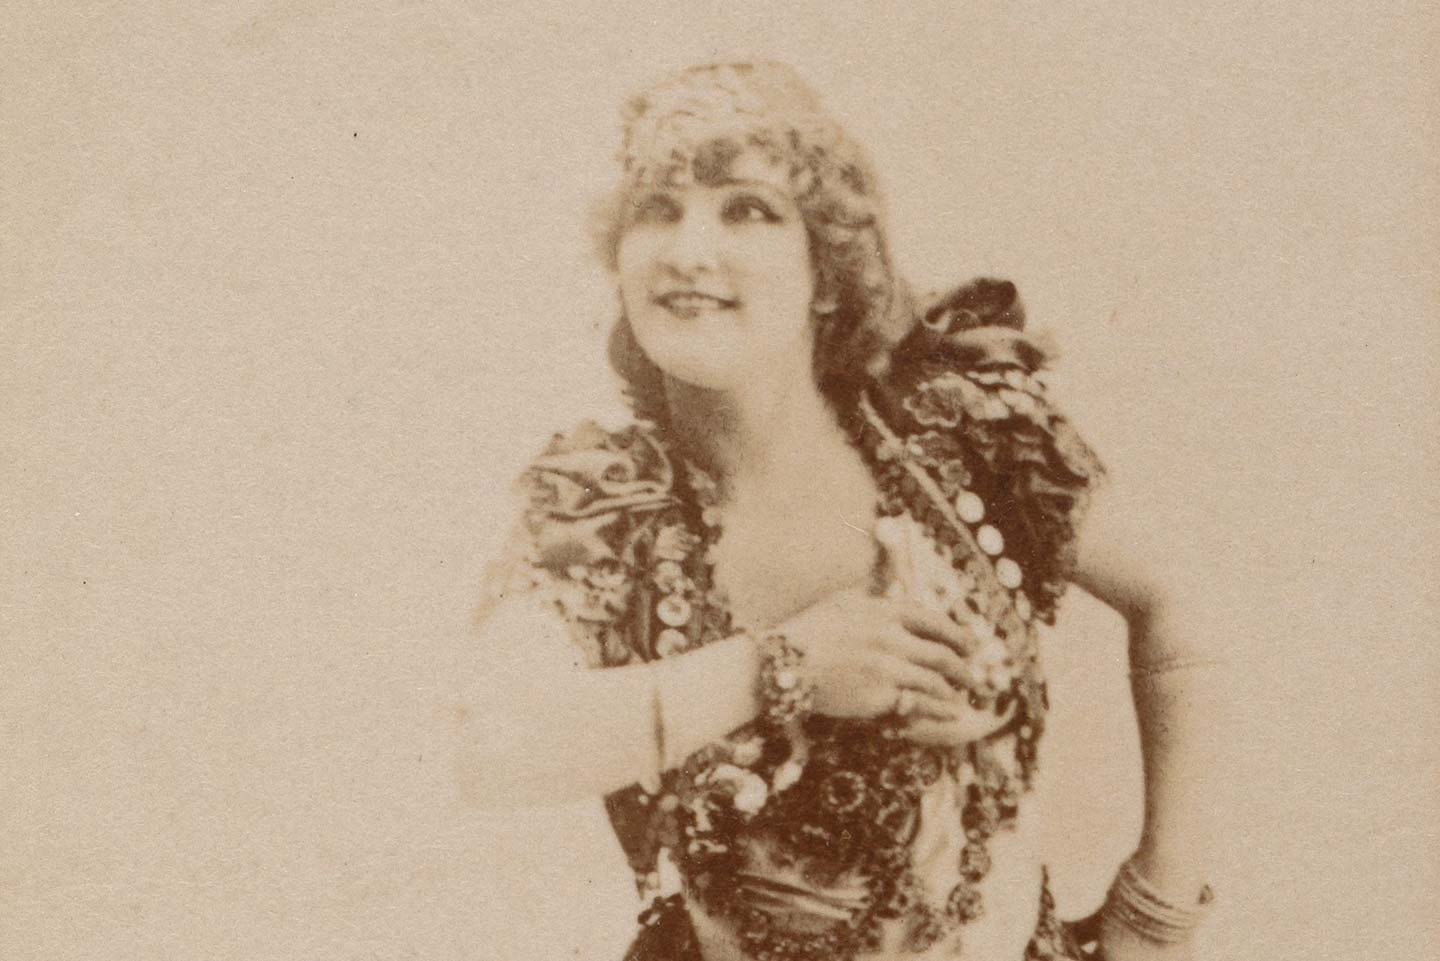 Detail of a cigarette card featuring belly dancer Omene in 